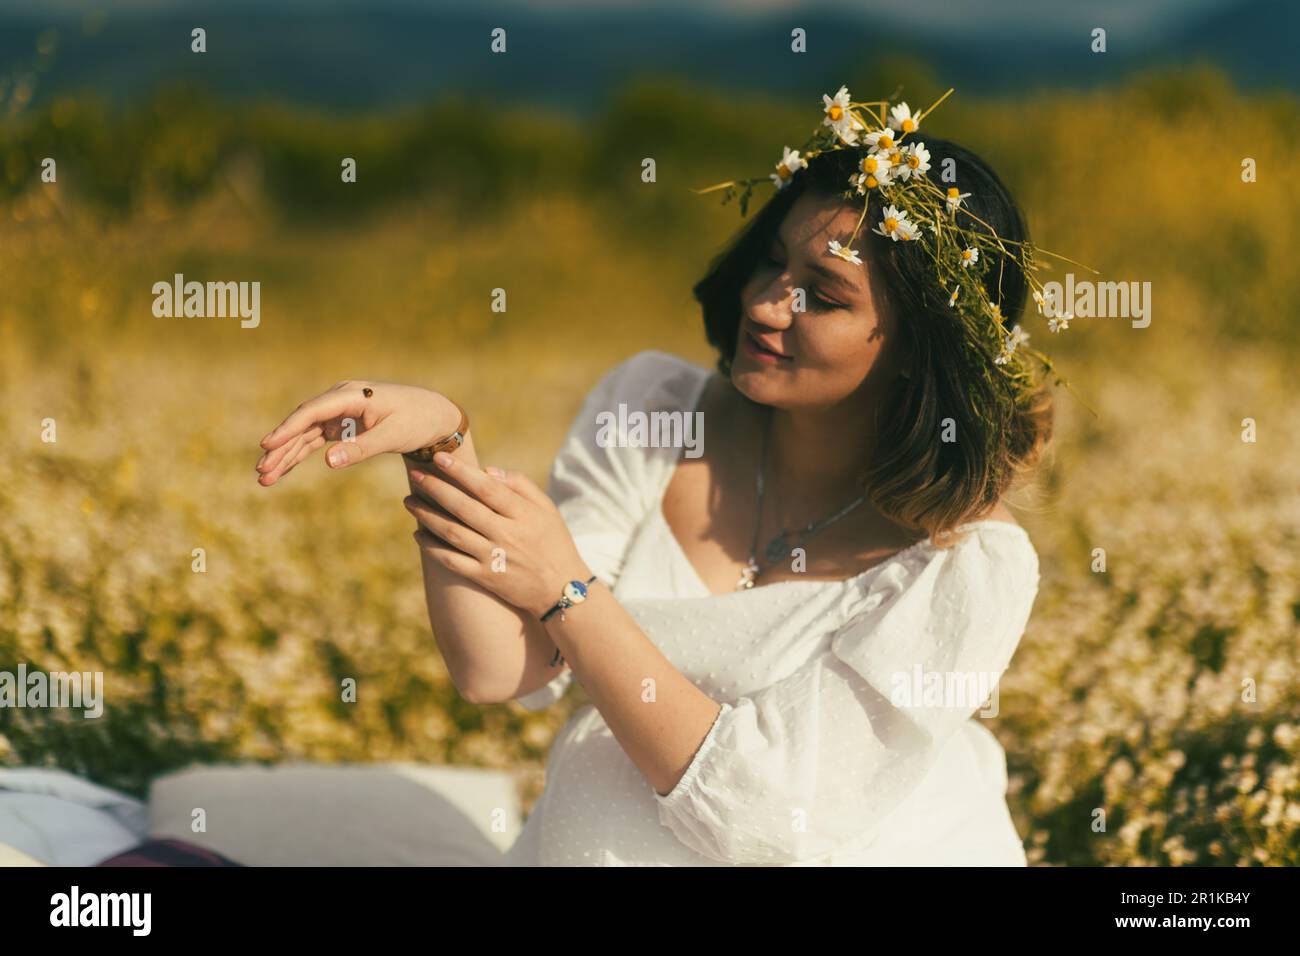 A midsection shot of a pregnant woman holding a ladybug, with a backdrop of blooming flowers and greenery Stock Photo